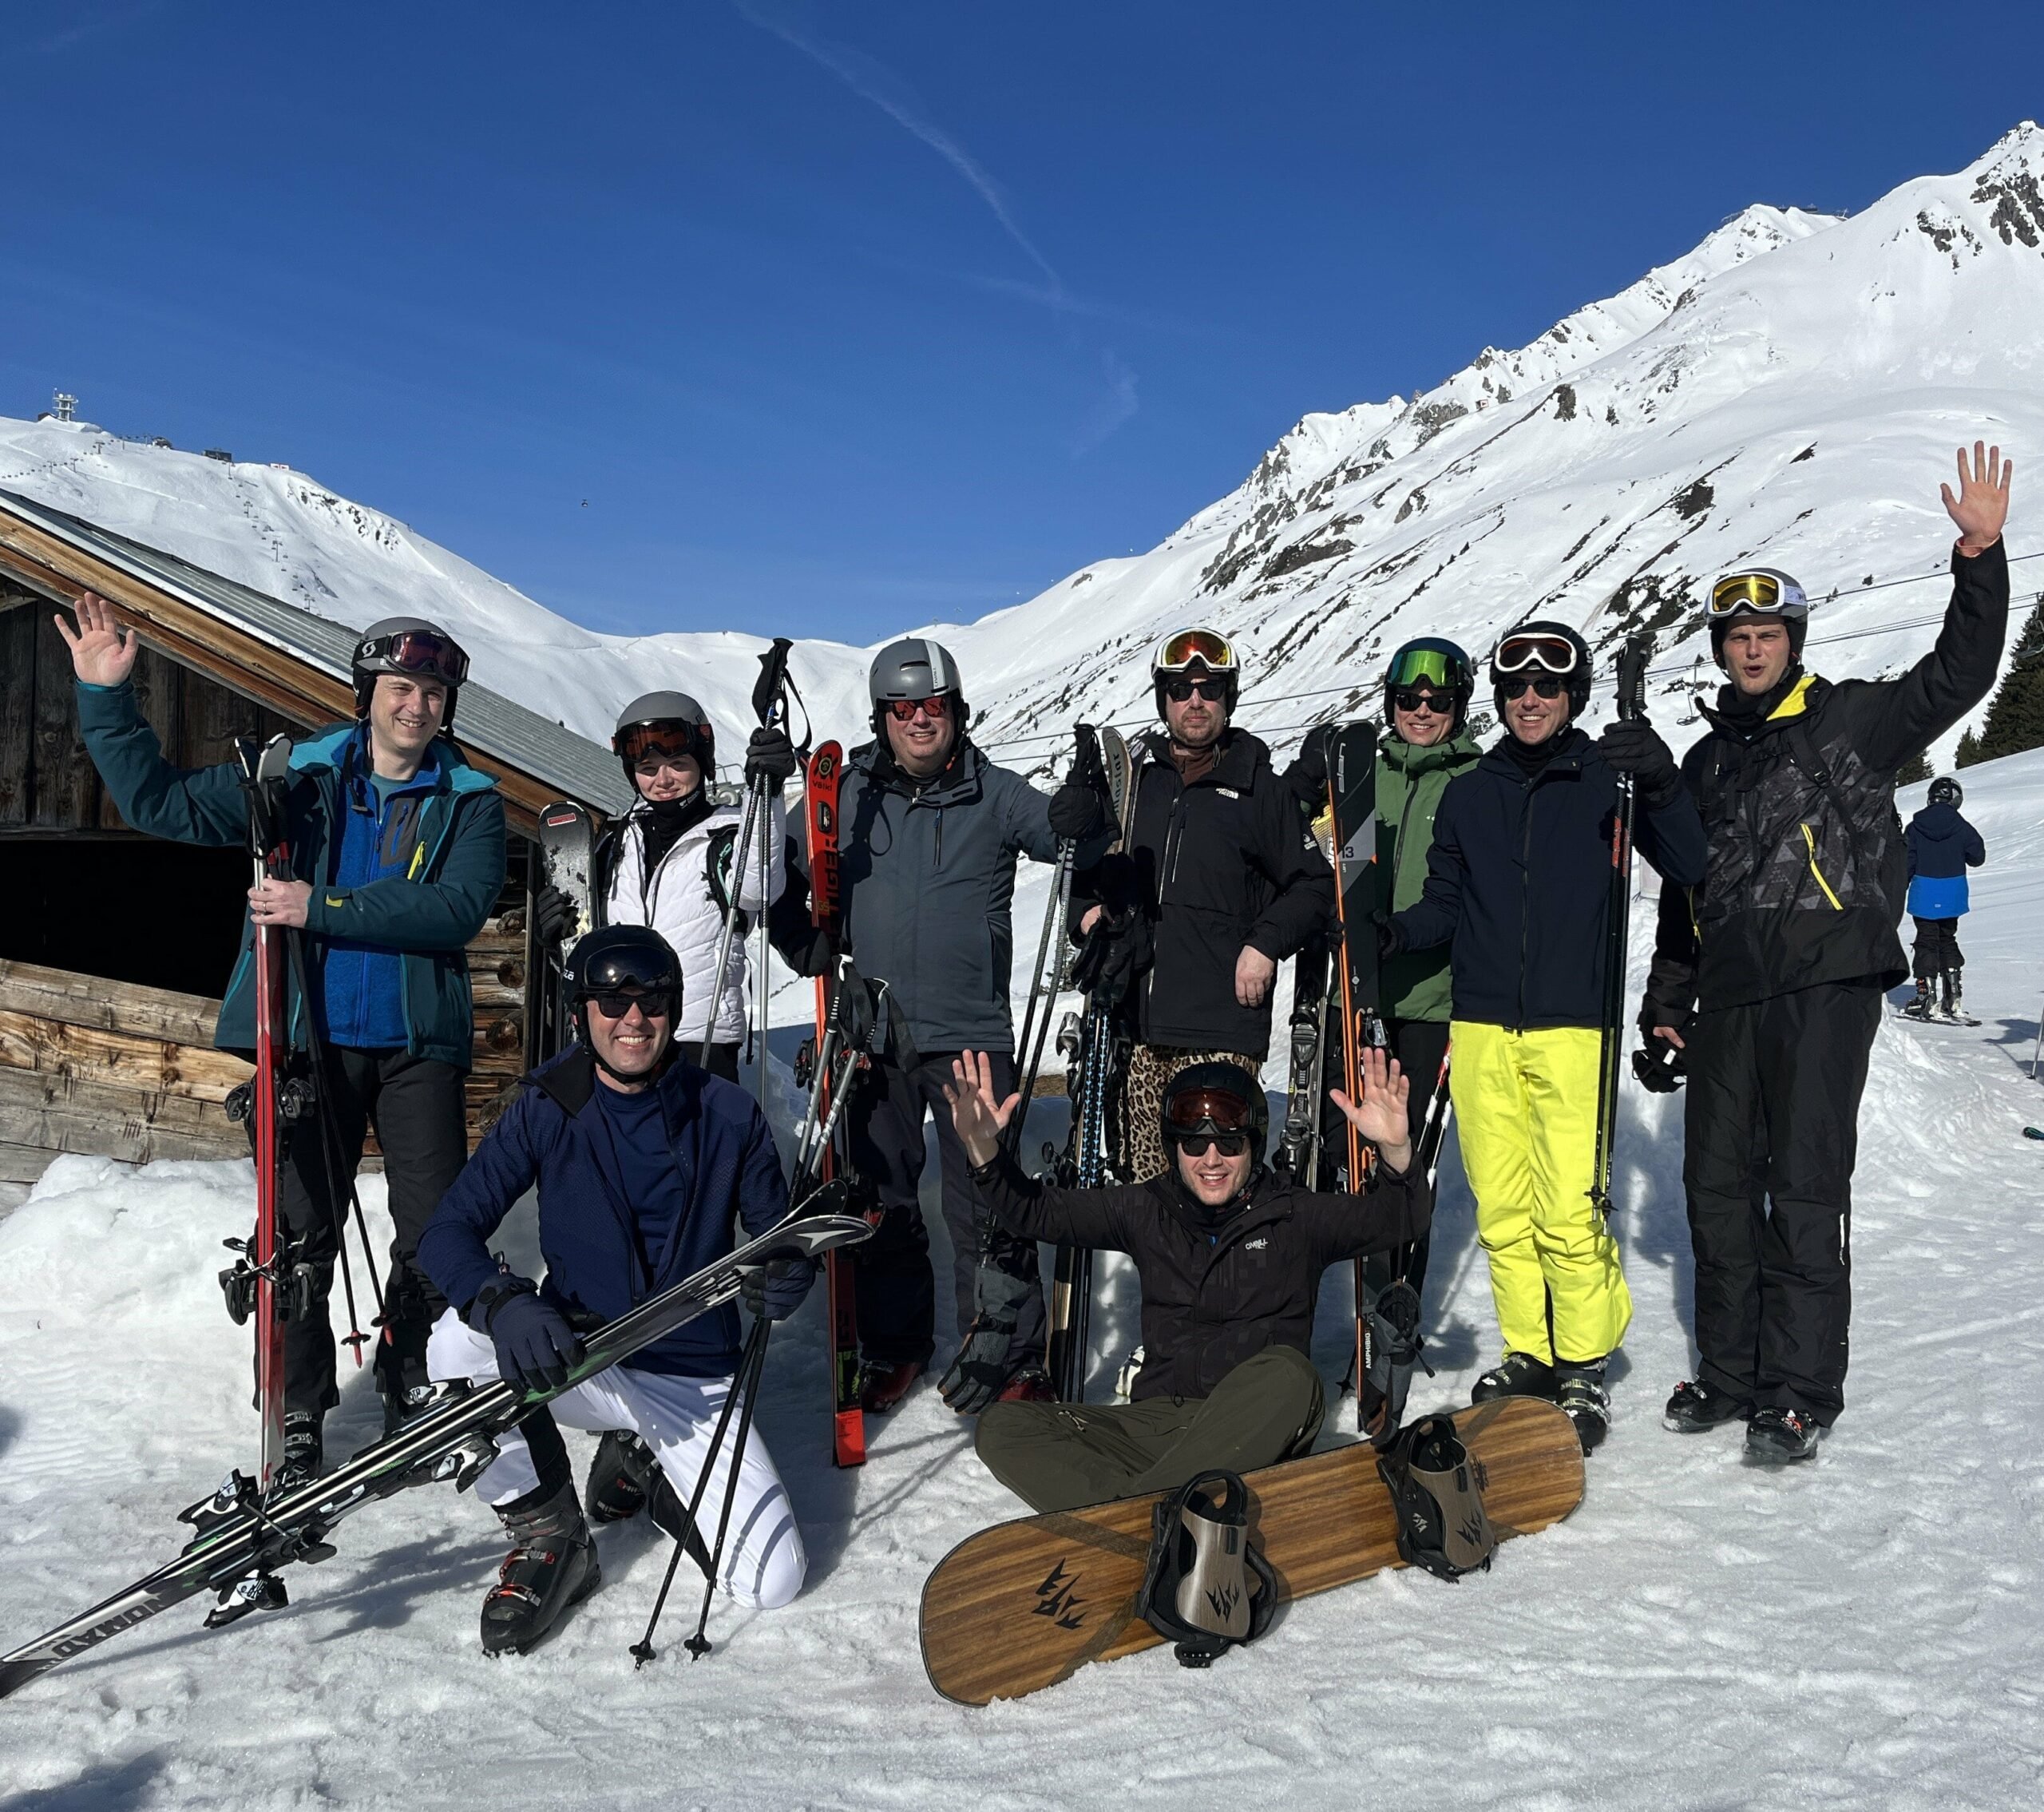 Group of TreasurUp team members enjoying a ski week in the picturesque snowy Alps, bonding over skiing adventures and team-building activities.